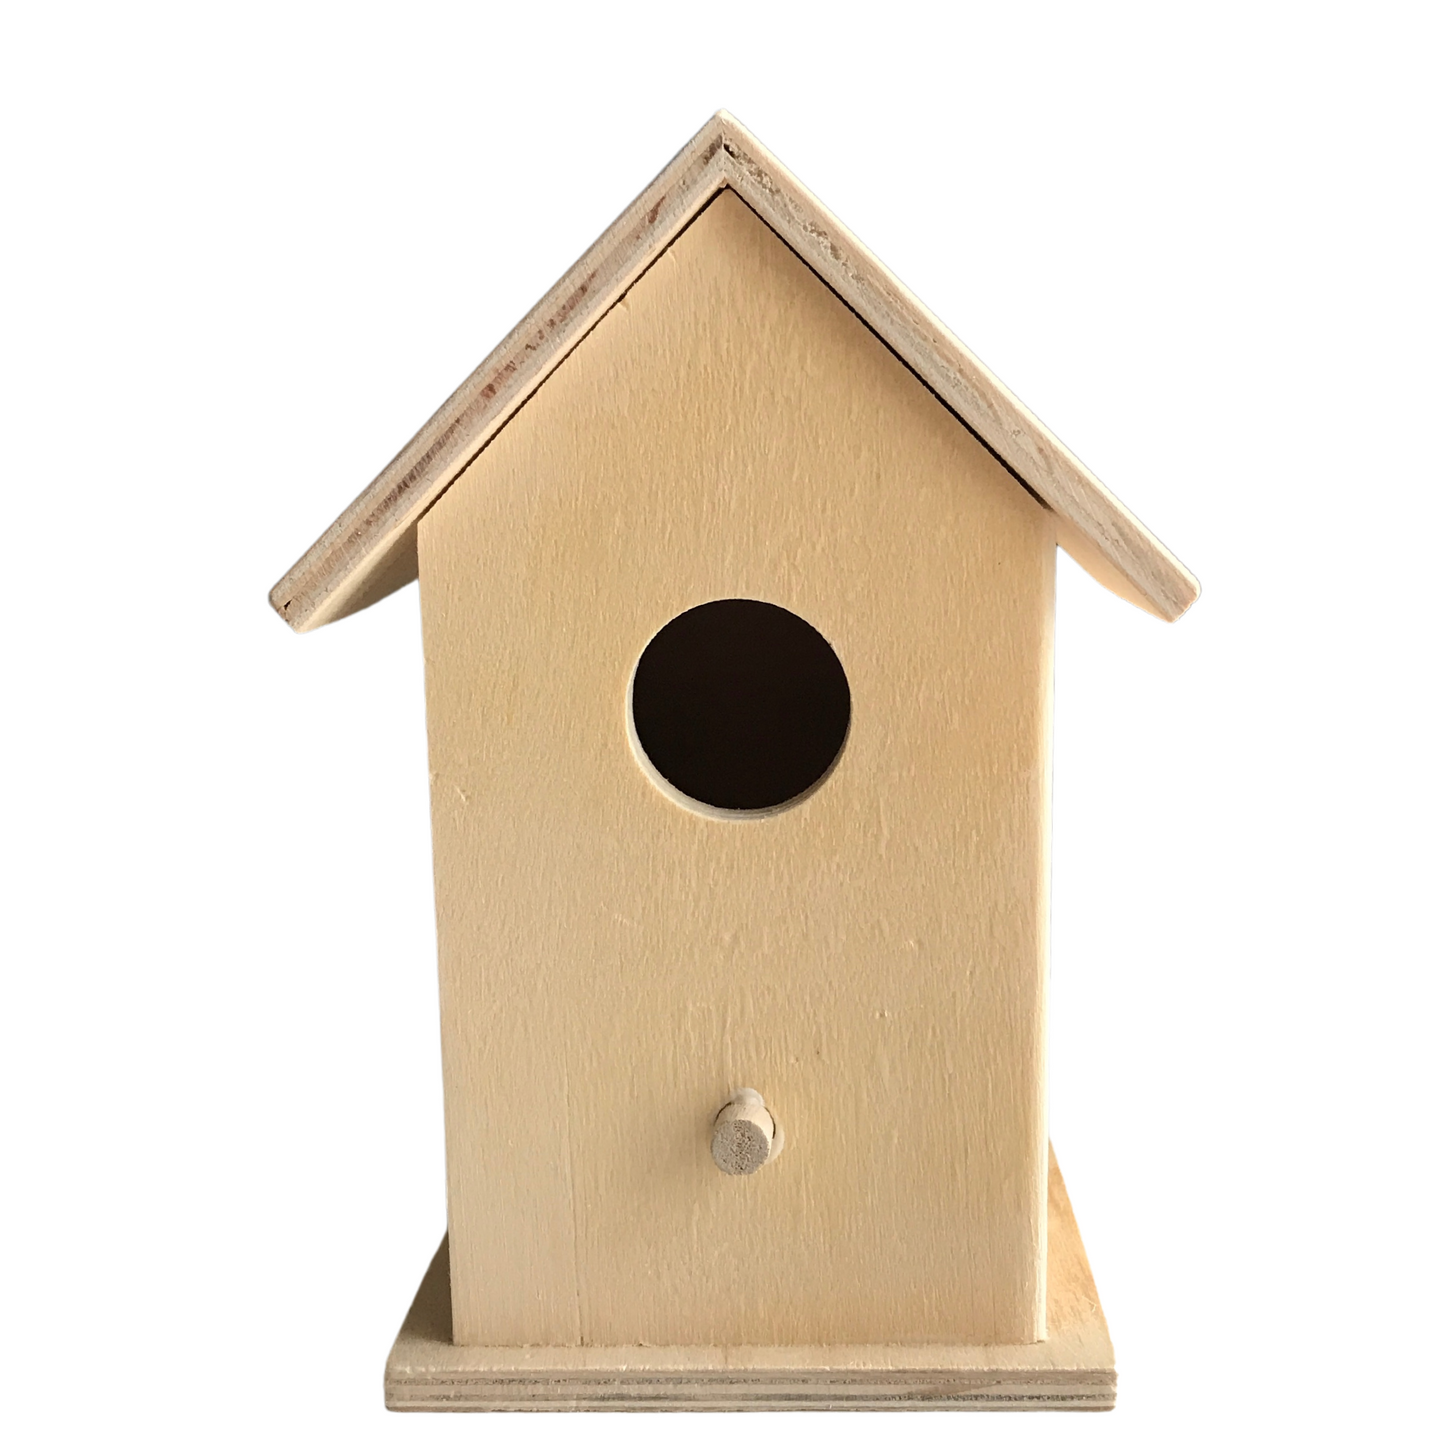 Birdhouse - primary school graduation "We flew out" - farewell gift for teacher - personalized with children's names